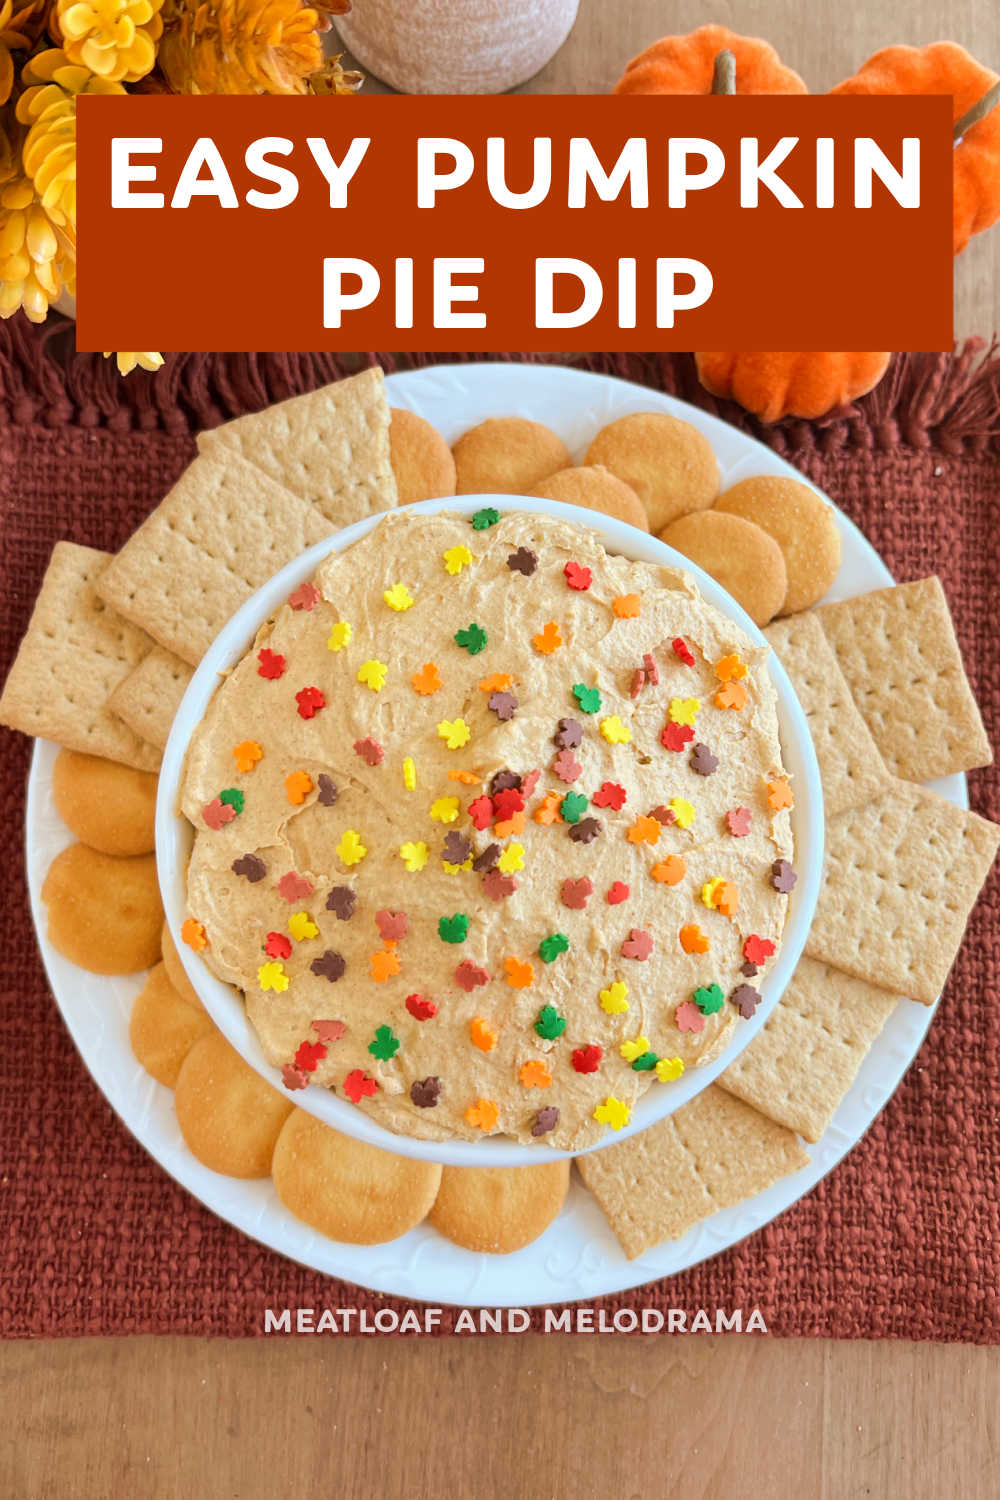 Easy Pumpkin Pie Dip with Cool Whip and pumpkin puree is an easy recipe for a quick fall dessert or appetizer. This fluffy sweet dip is perfect for Halloween or Thanksgiving and comes together in minutes! via @meamel